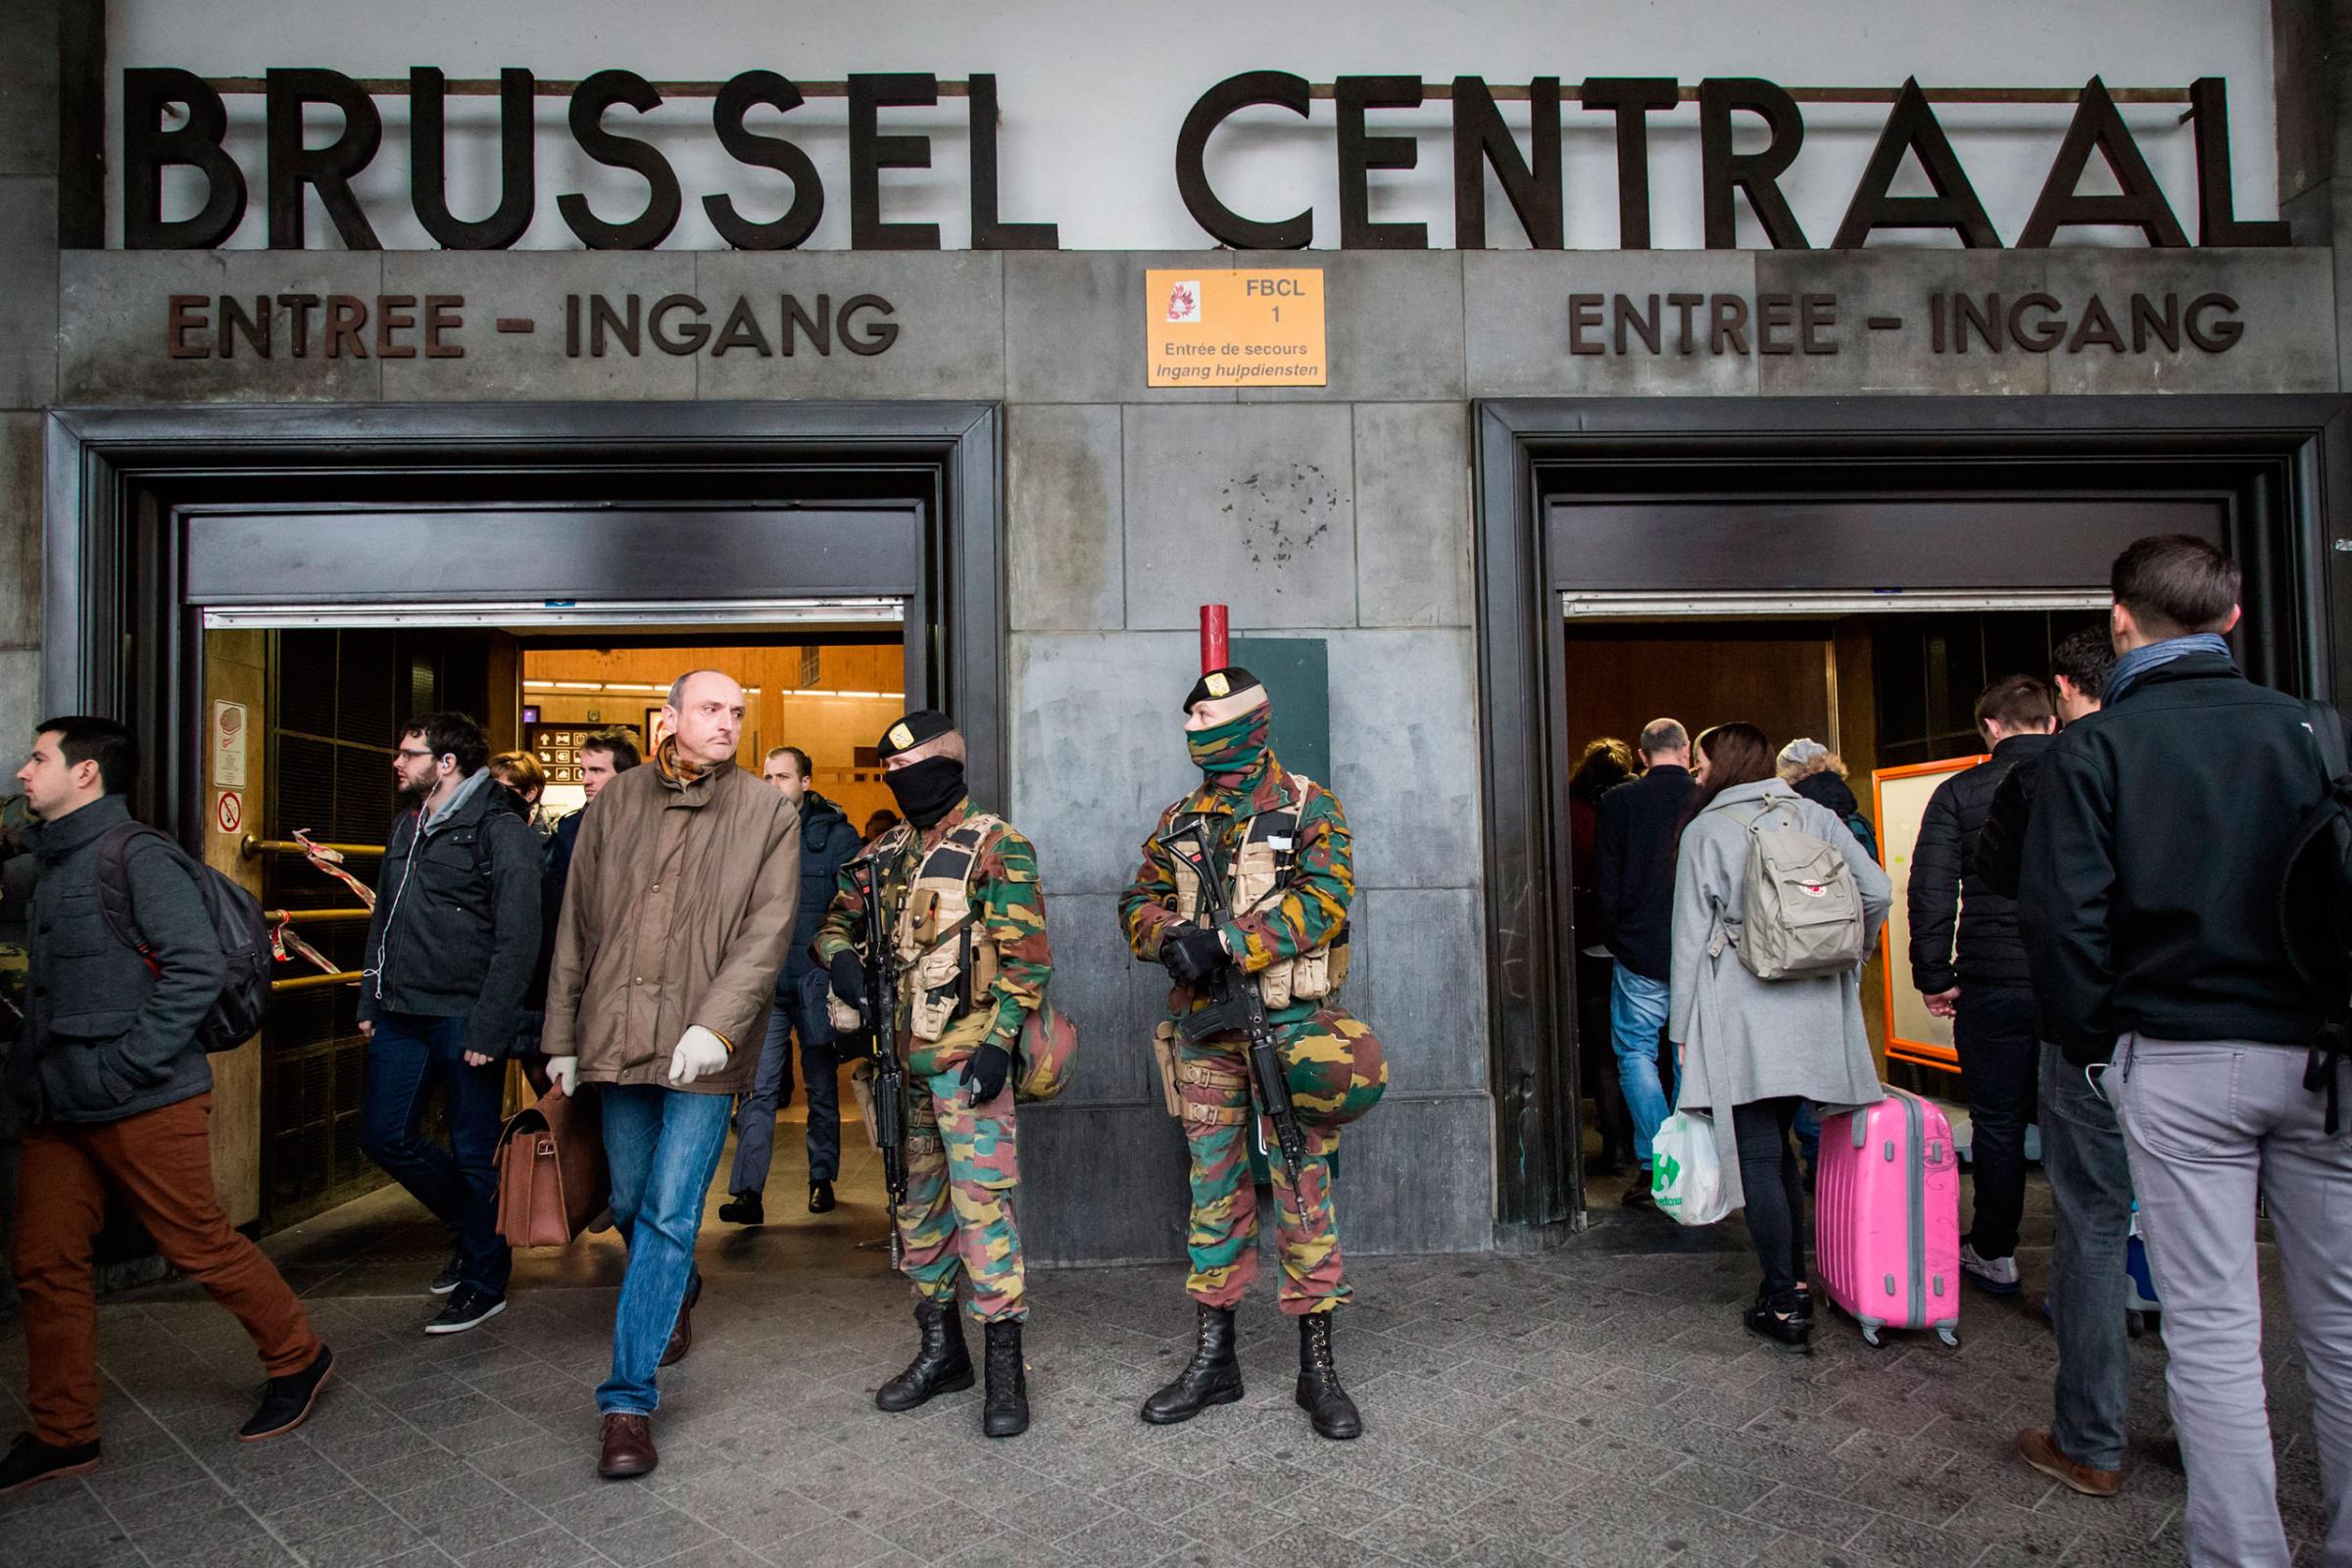 Soldiers stand guard at the entrance of central station, one day after the terrorist attacks killed at least 31 people, in Brussels, Belgium, March 23, 2016.